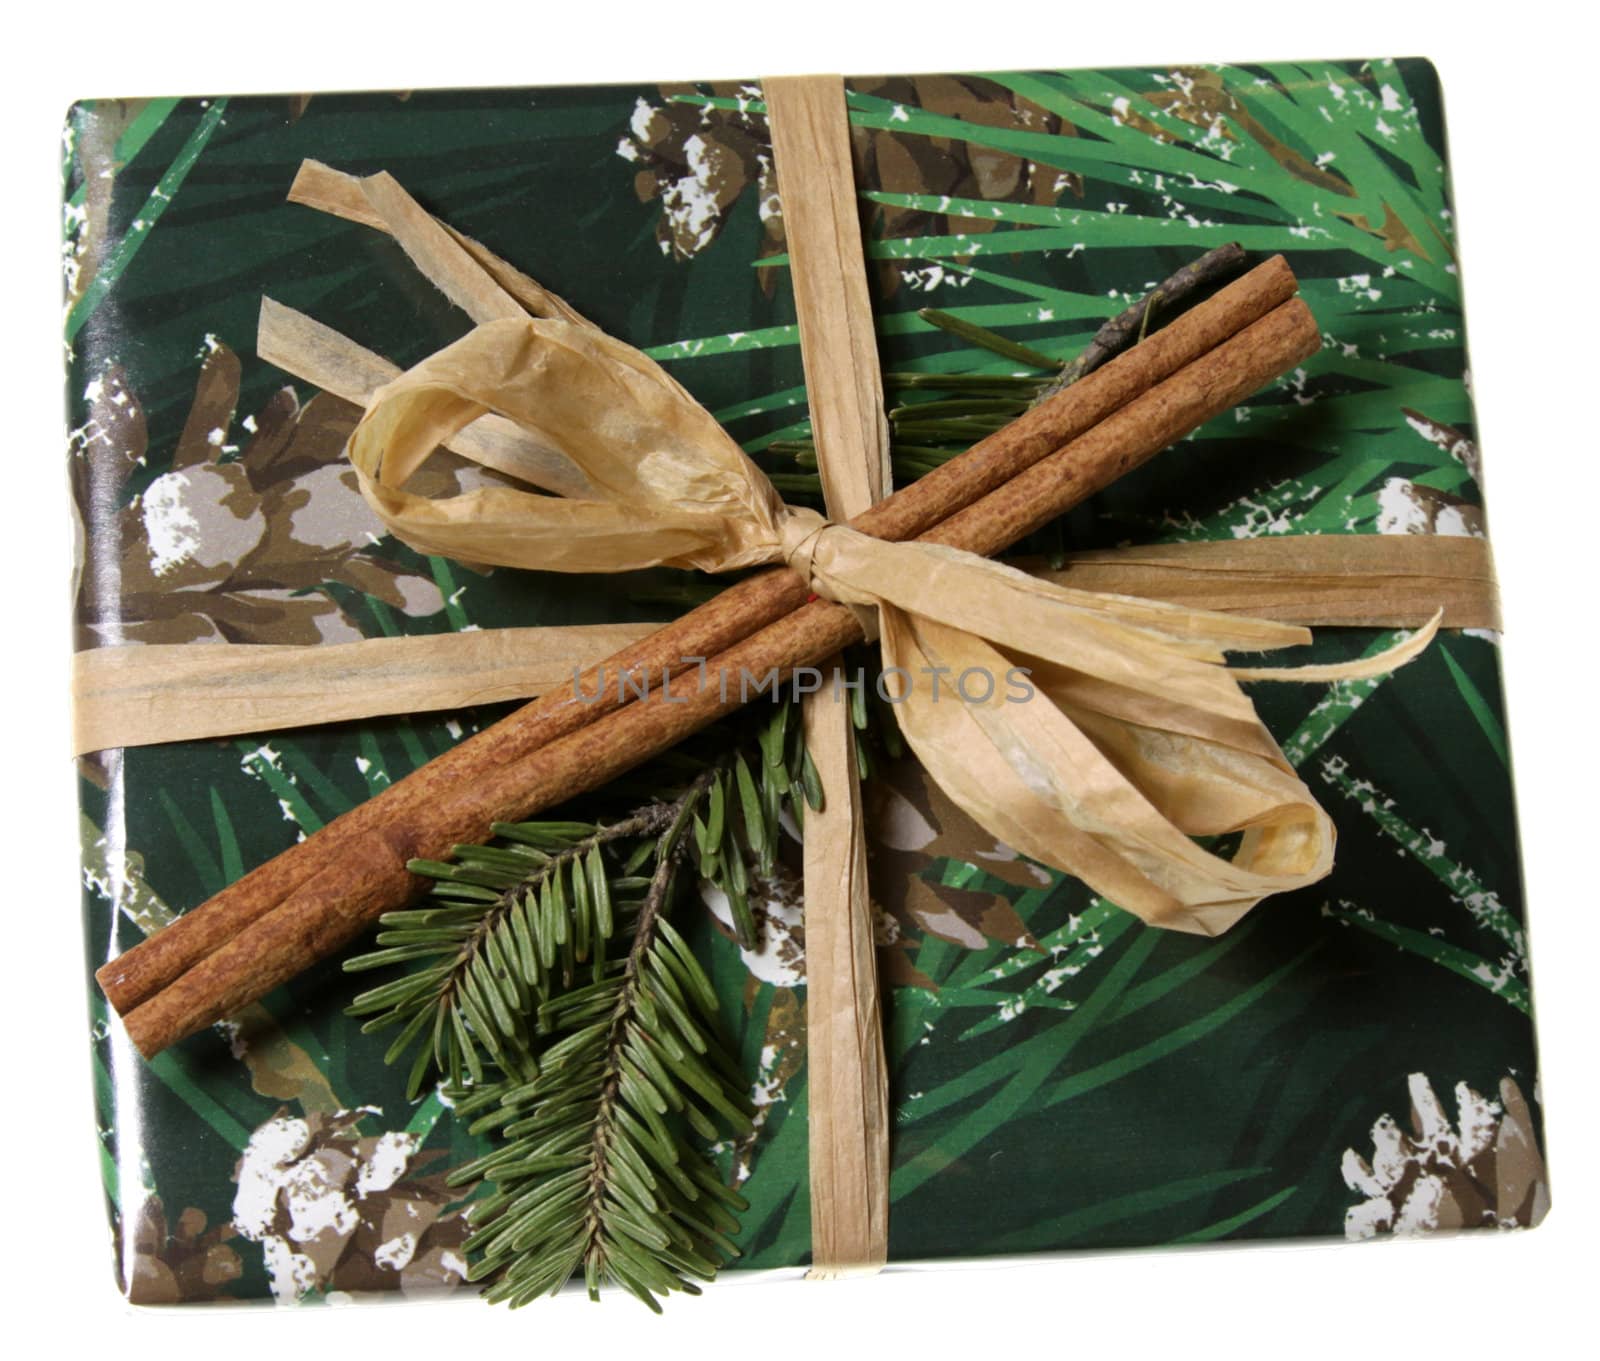 A beautifully wrapped Christmas present, featuring green paper, cinnamon, and spruce branch.